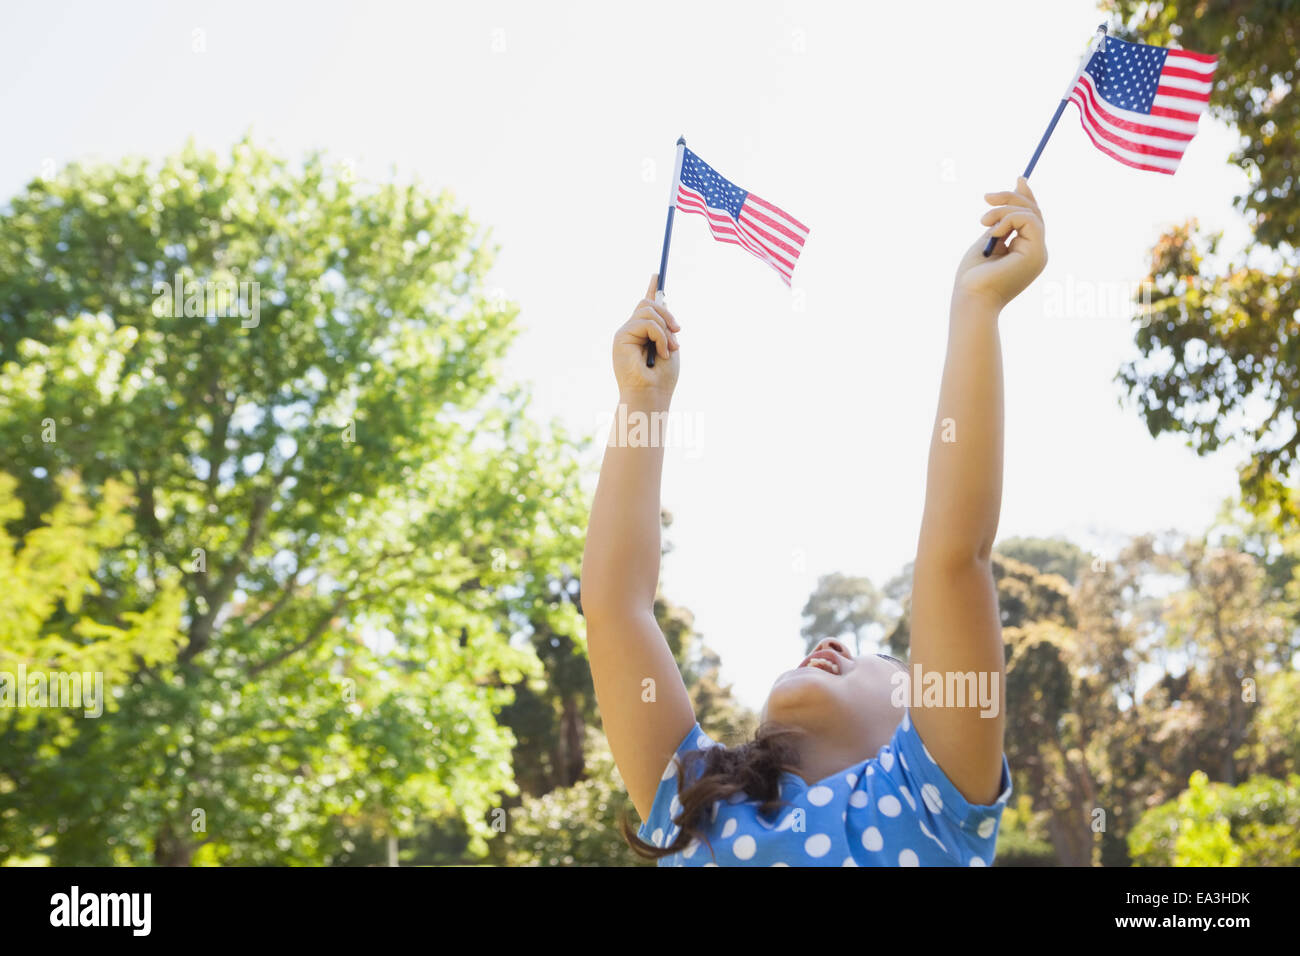 Girl holding up two American flags at park Stock Photo